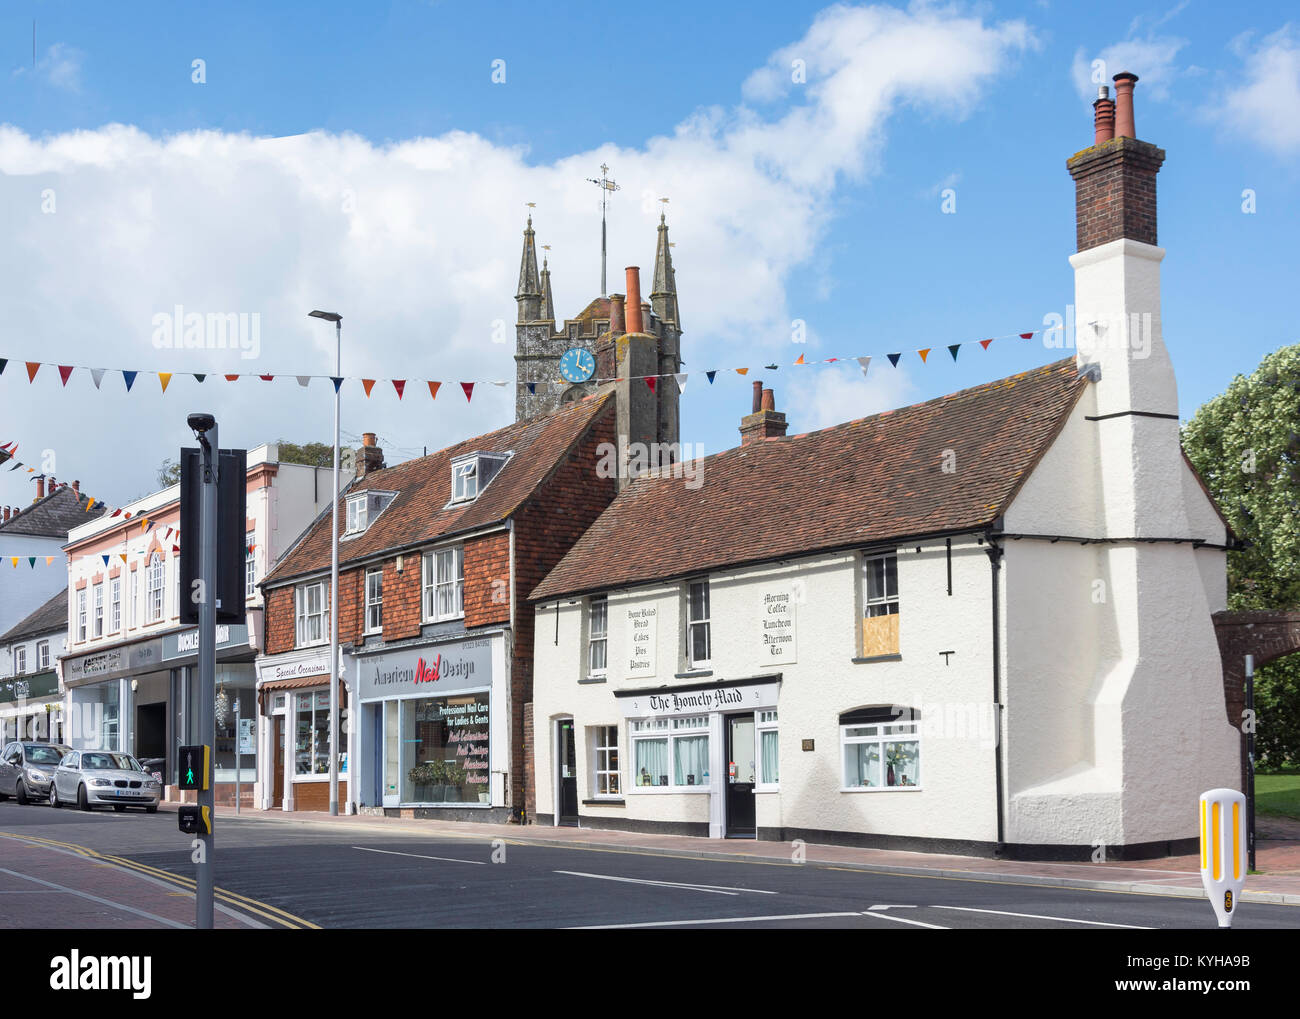 High Street showing St.Mary's Church tower, Hailsham, East Sussex, England, United Kingdom Stock Photo